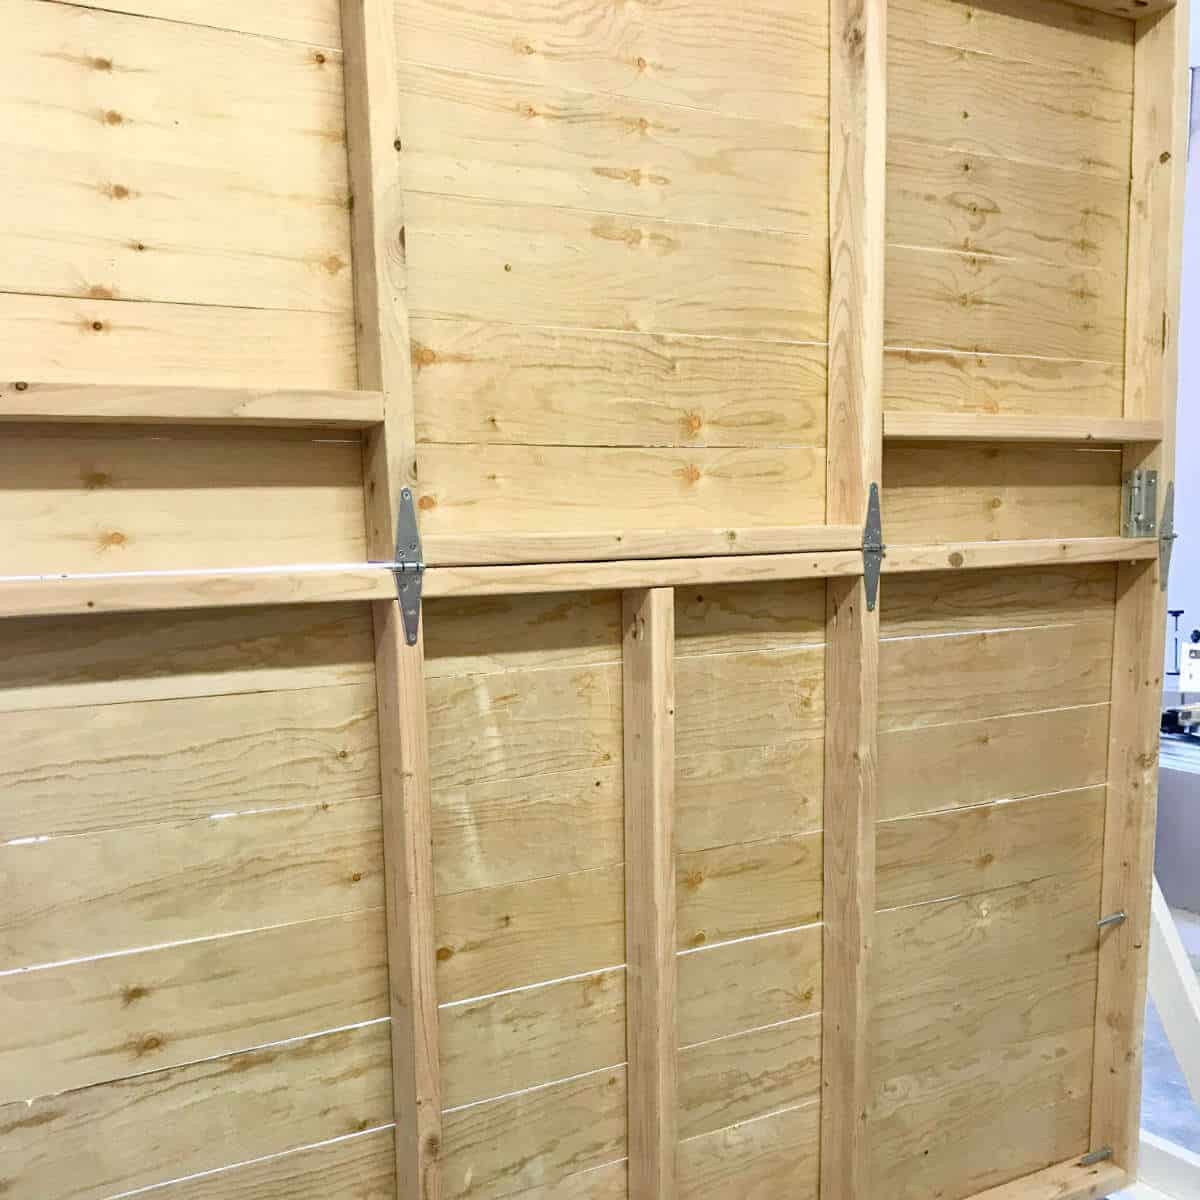 The back side of a backdrop wall made out of wood.